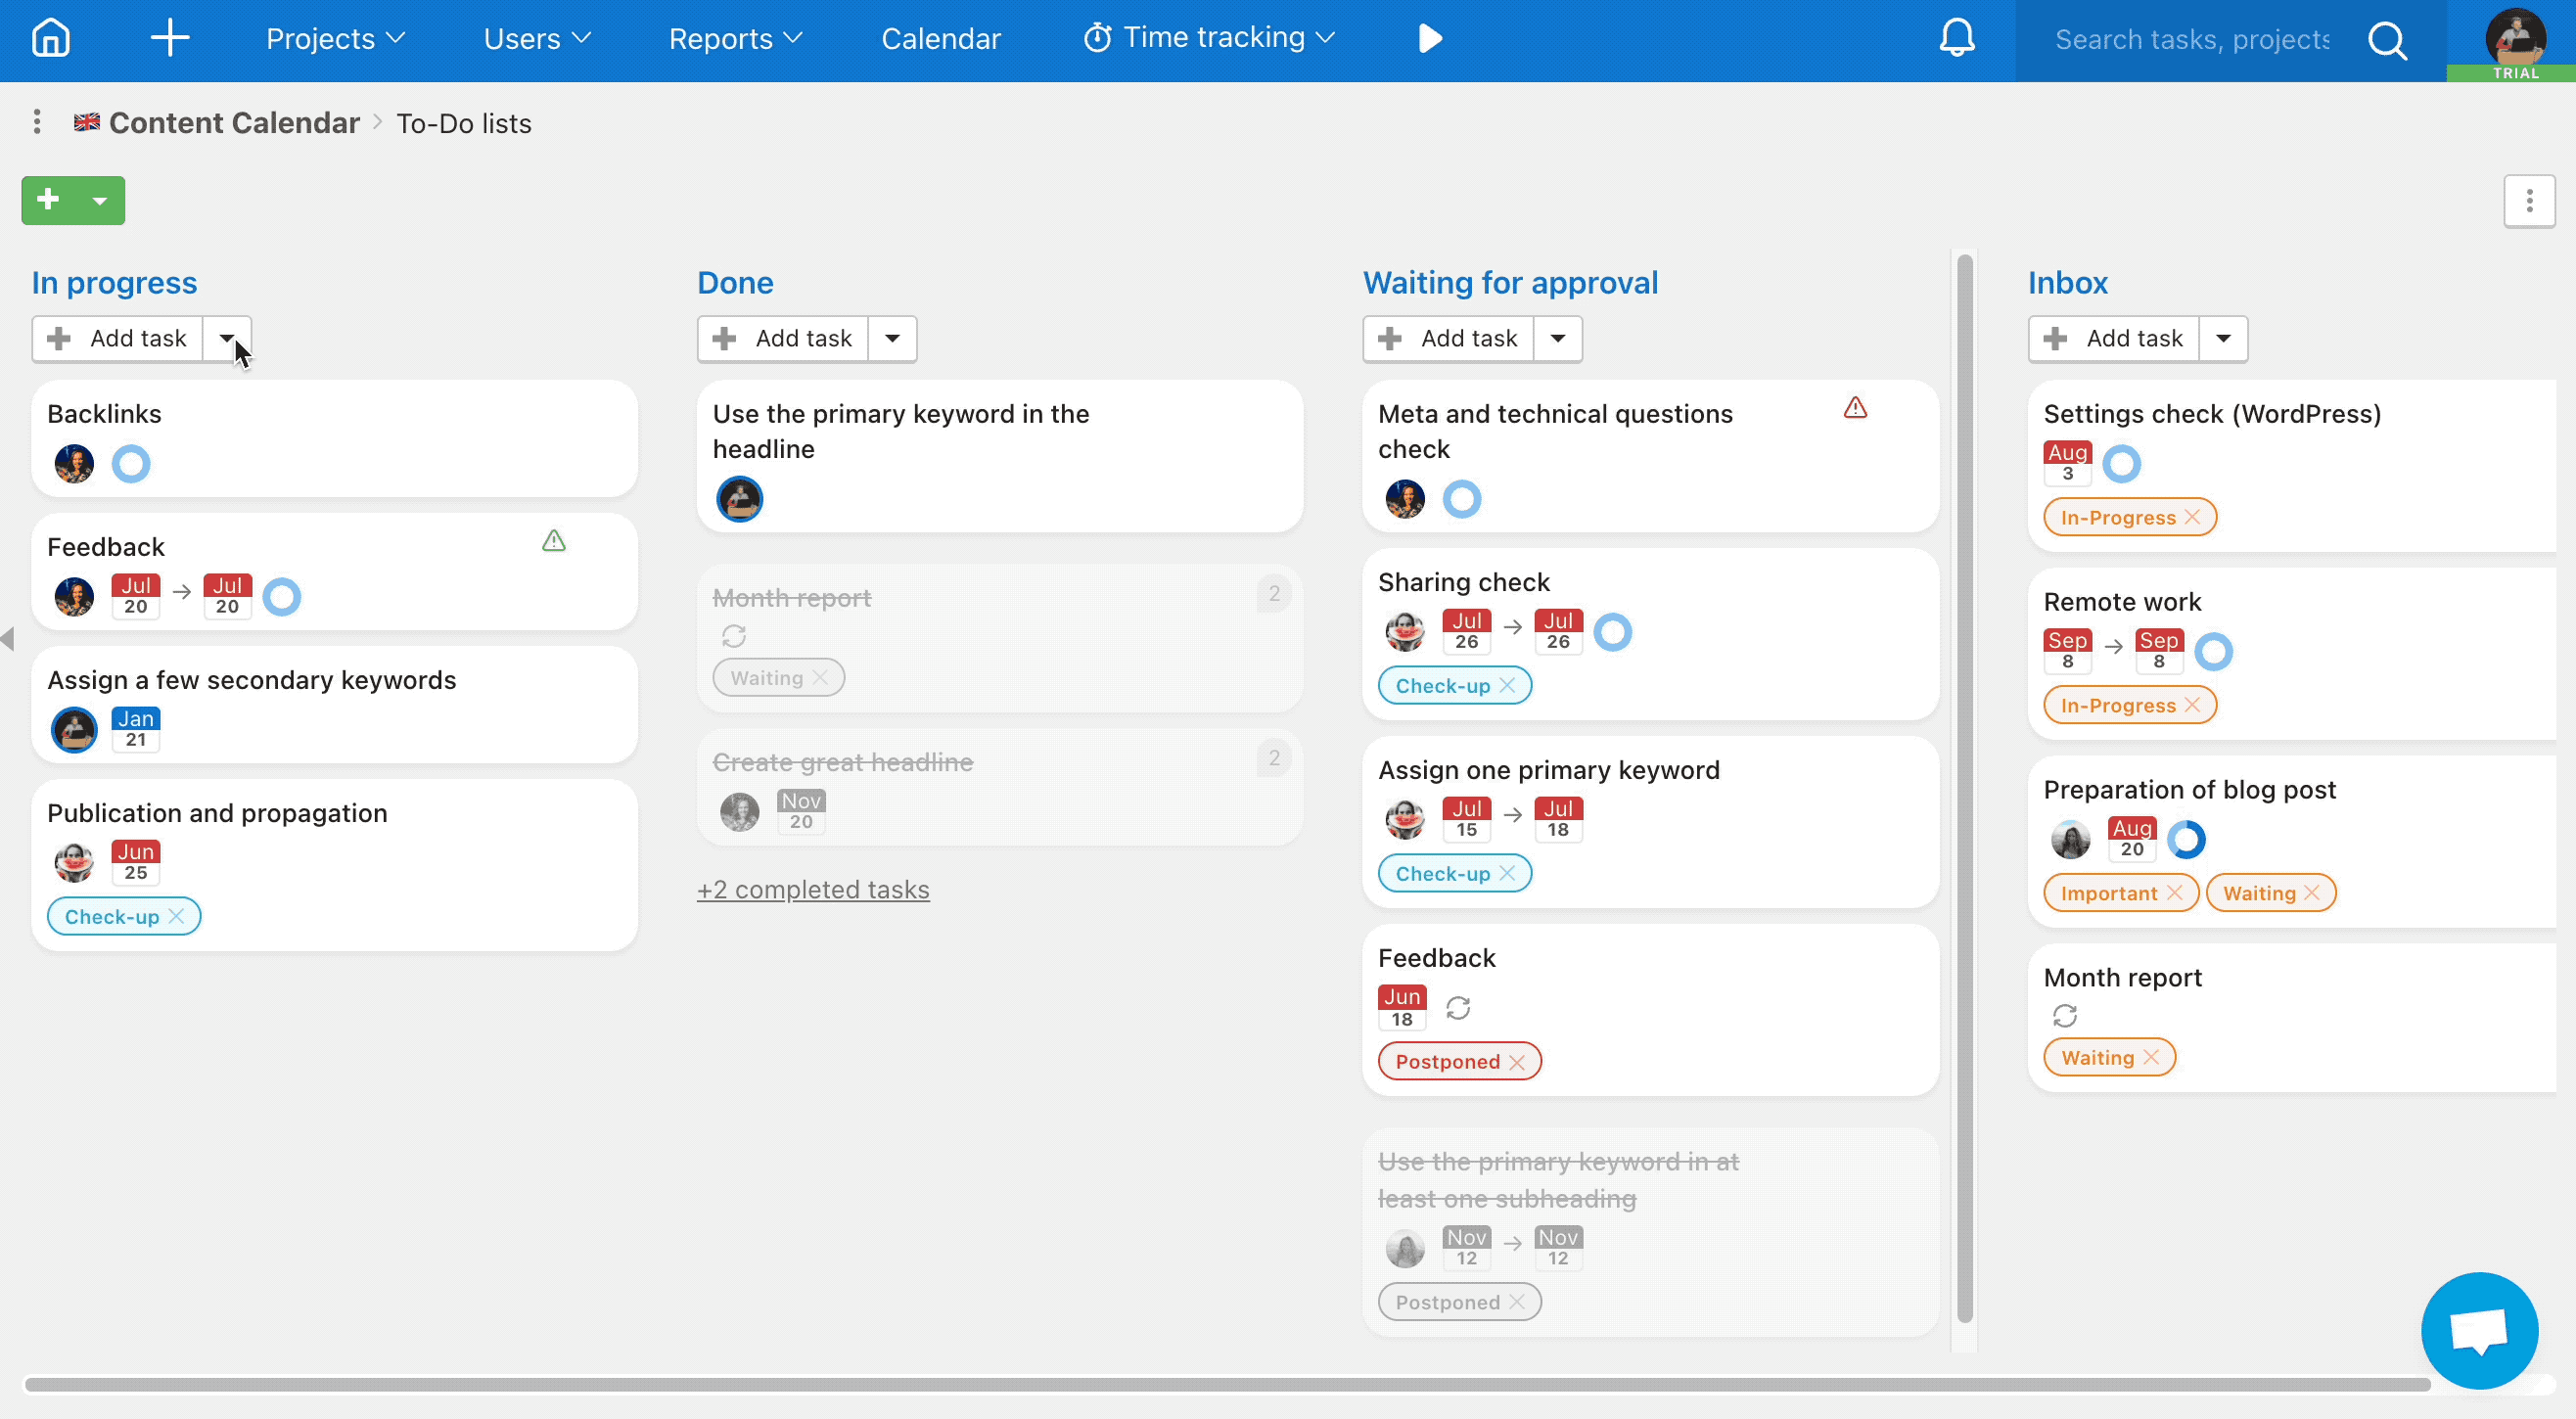 Use Drag&Drop to move To-Do lists within one project.